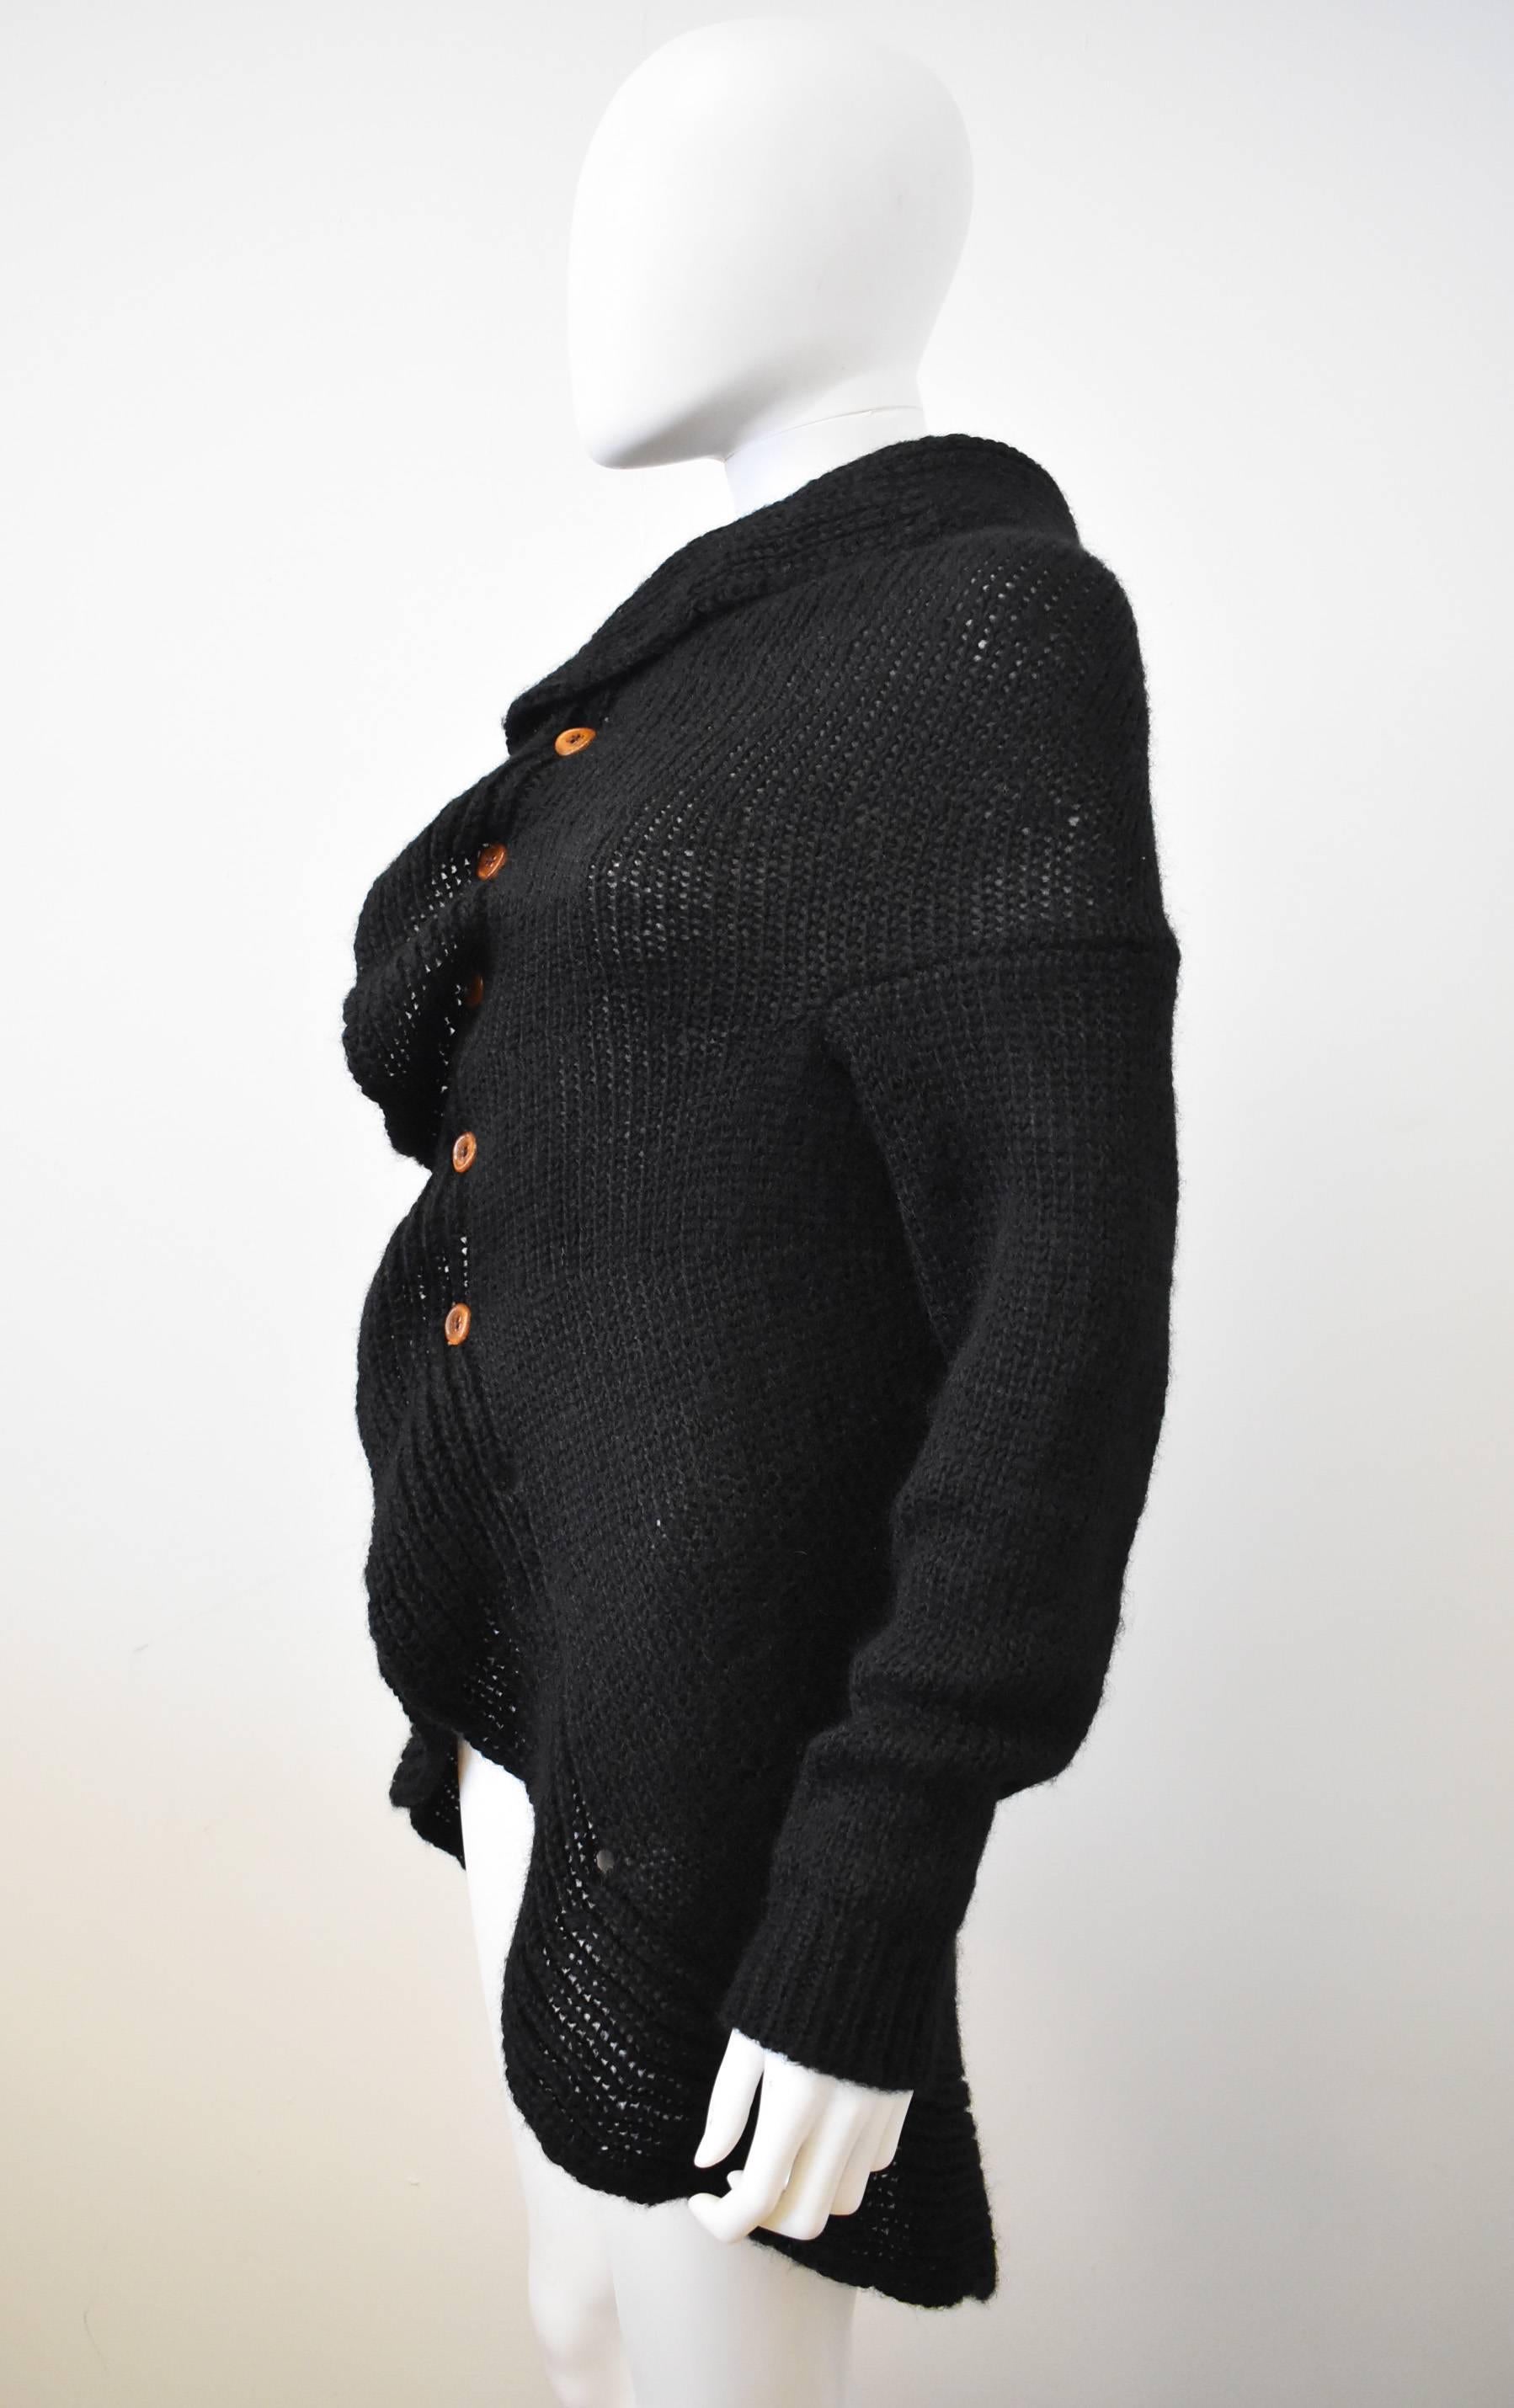 This black 2002 cardigan by Comme des Garcons has a wonderful shape with a high collar, central button fastening and a scoop line hem. The front has a frill that flows along the opening and  is made from a Mohair and Acrylic blend. It is a chunky